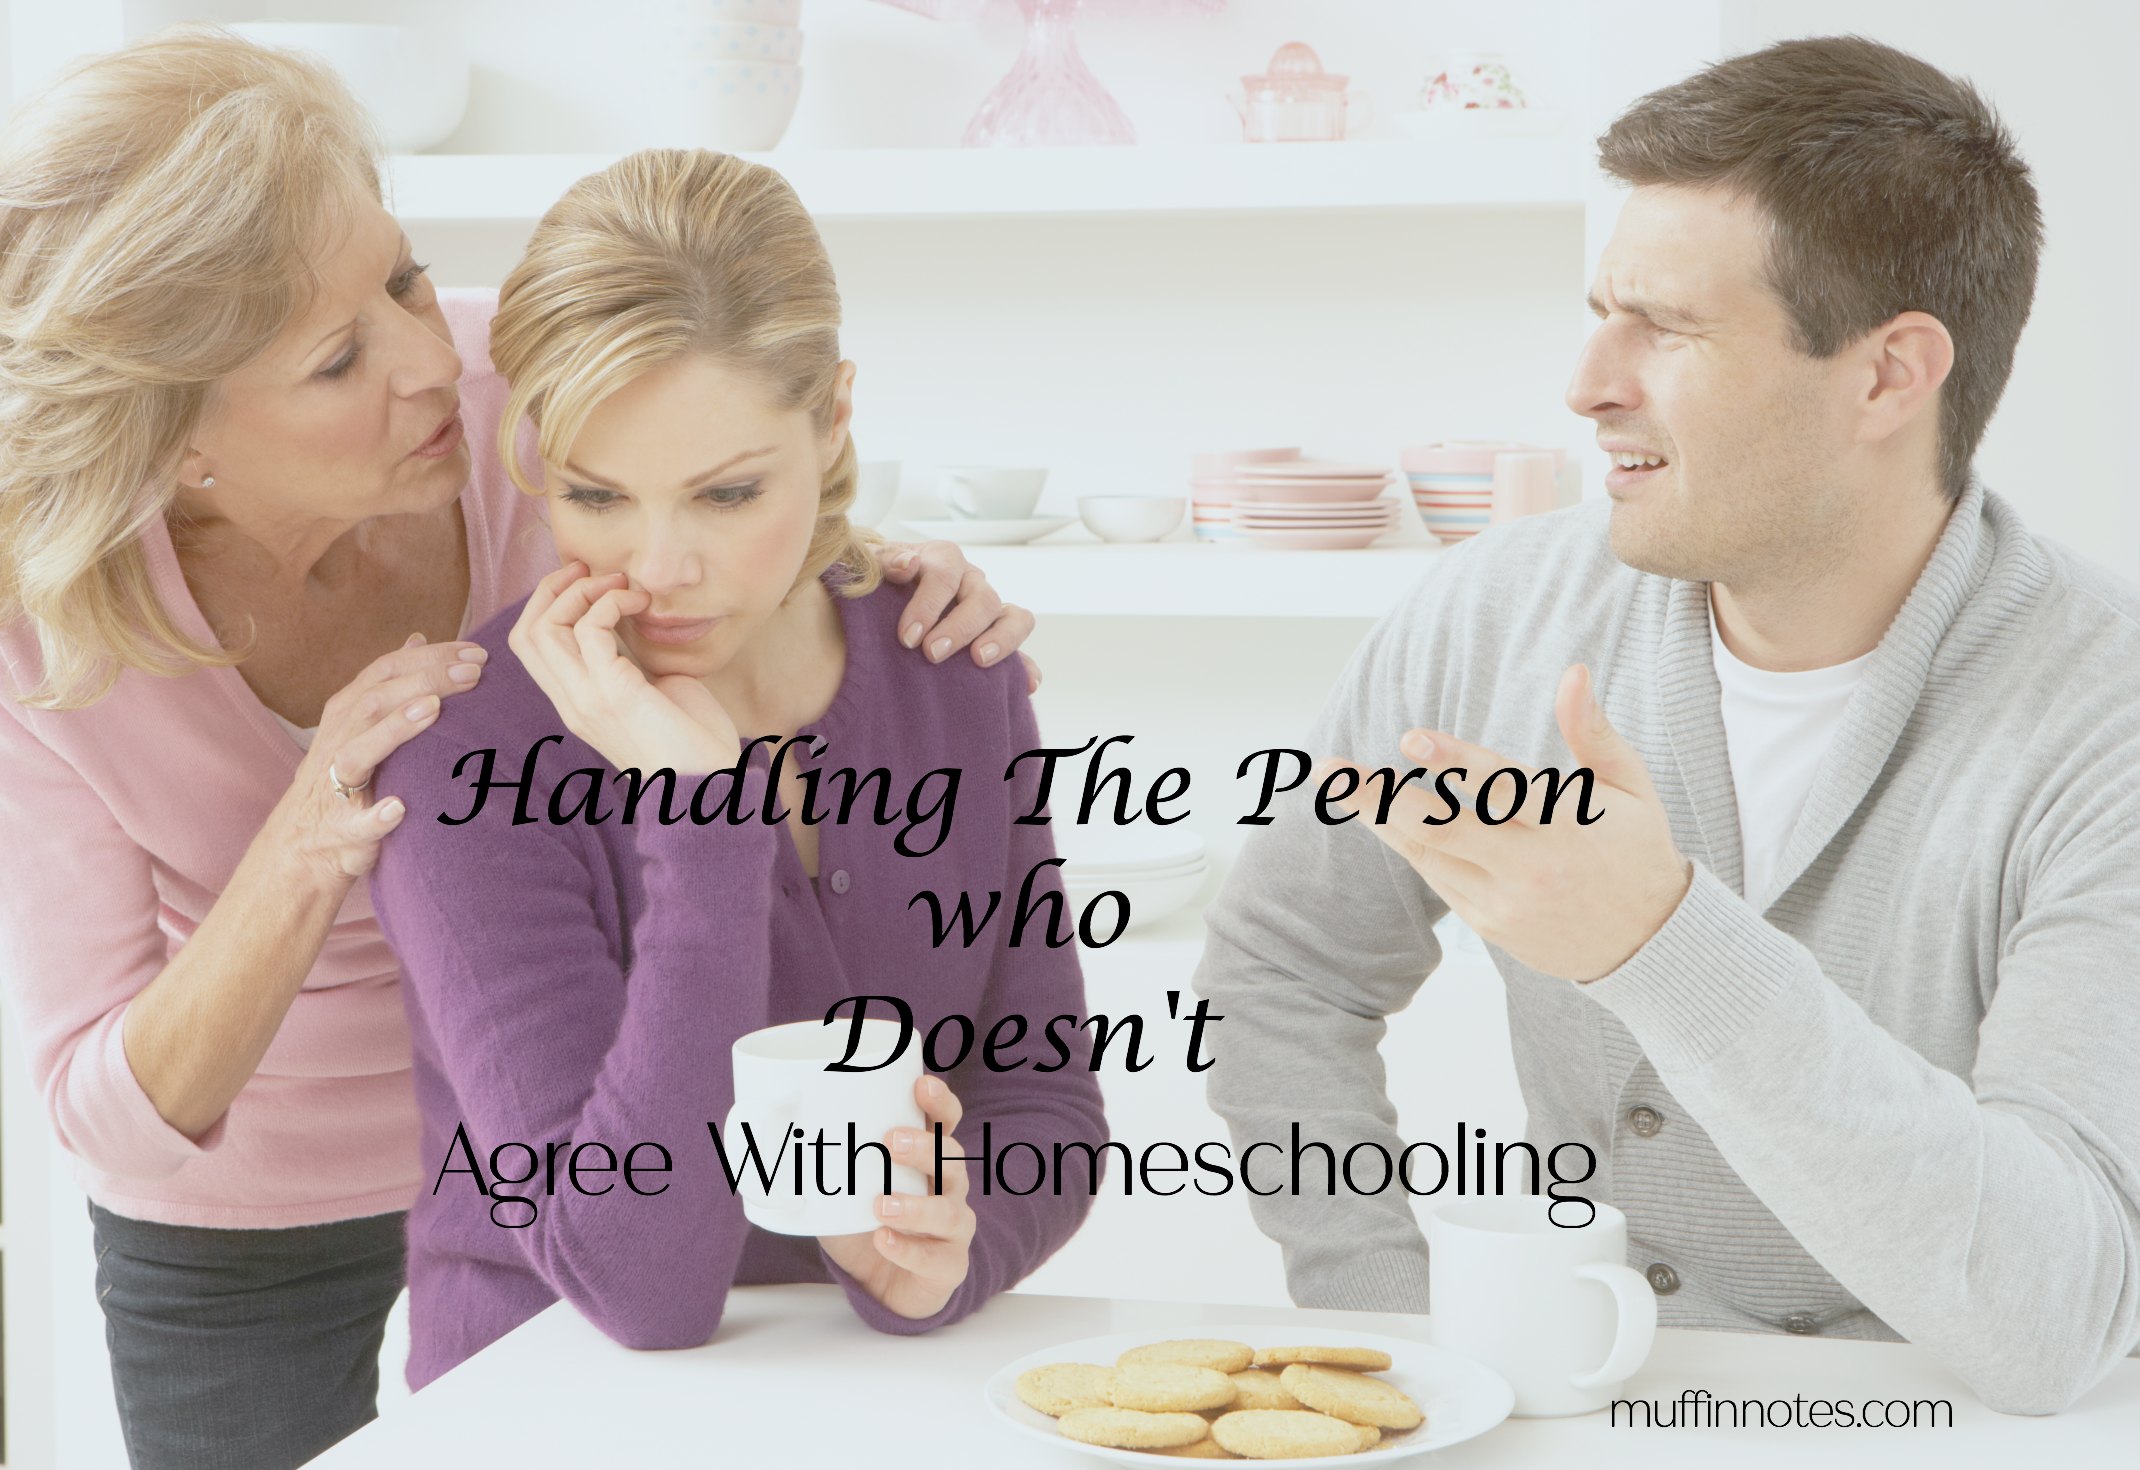 doesn't agree with homeschooling